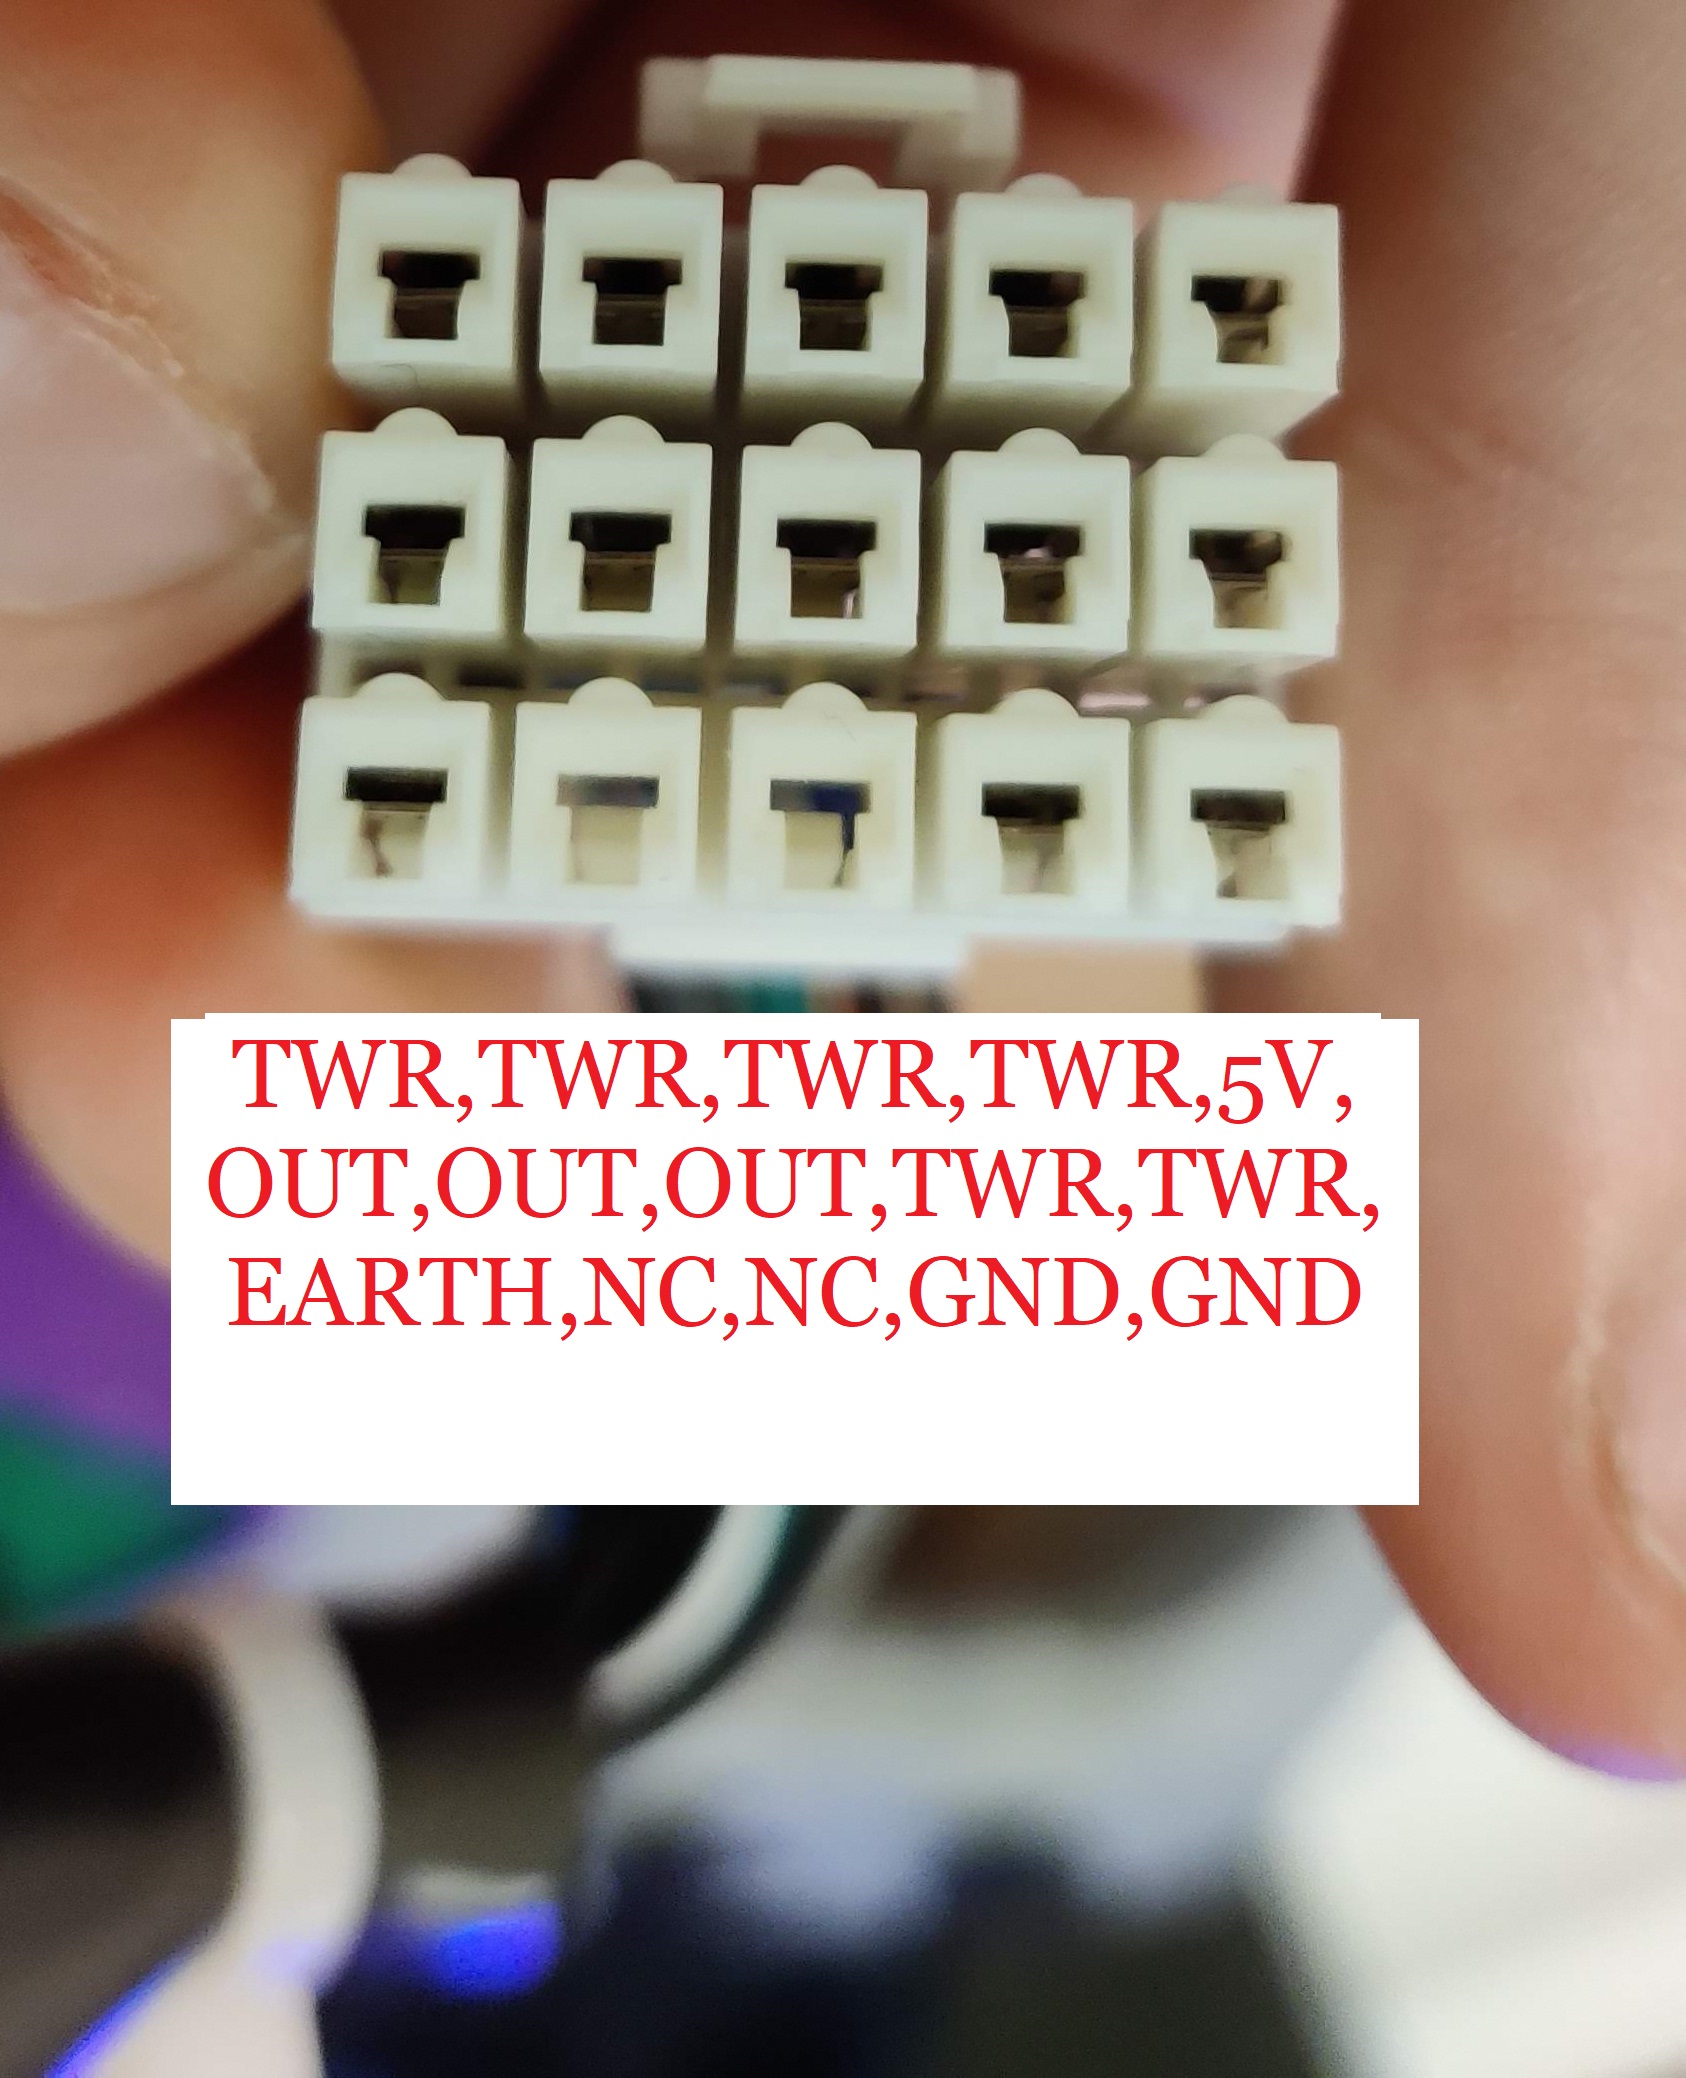 An image showing the sensor connector from a chunithm air string unit. The pinout is annotated, left to right, top to bottom, as so: 5V, TOWER, TOWER, TOWER, TOWER, TOWER, TOWER, OUTPUT, OUTPUT, OUTPUT, GND, GND, NC, EARTH. The pins marked 'tower' connect to the other air tower on the other side, so pin 2 -> pin 2, pin 3 -> pin 3 and so on. Outputs are where the state of the tower can be read from (order to be checked).